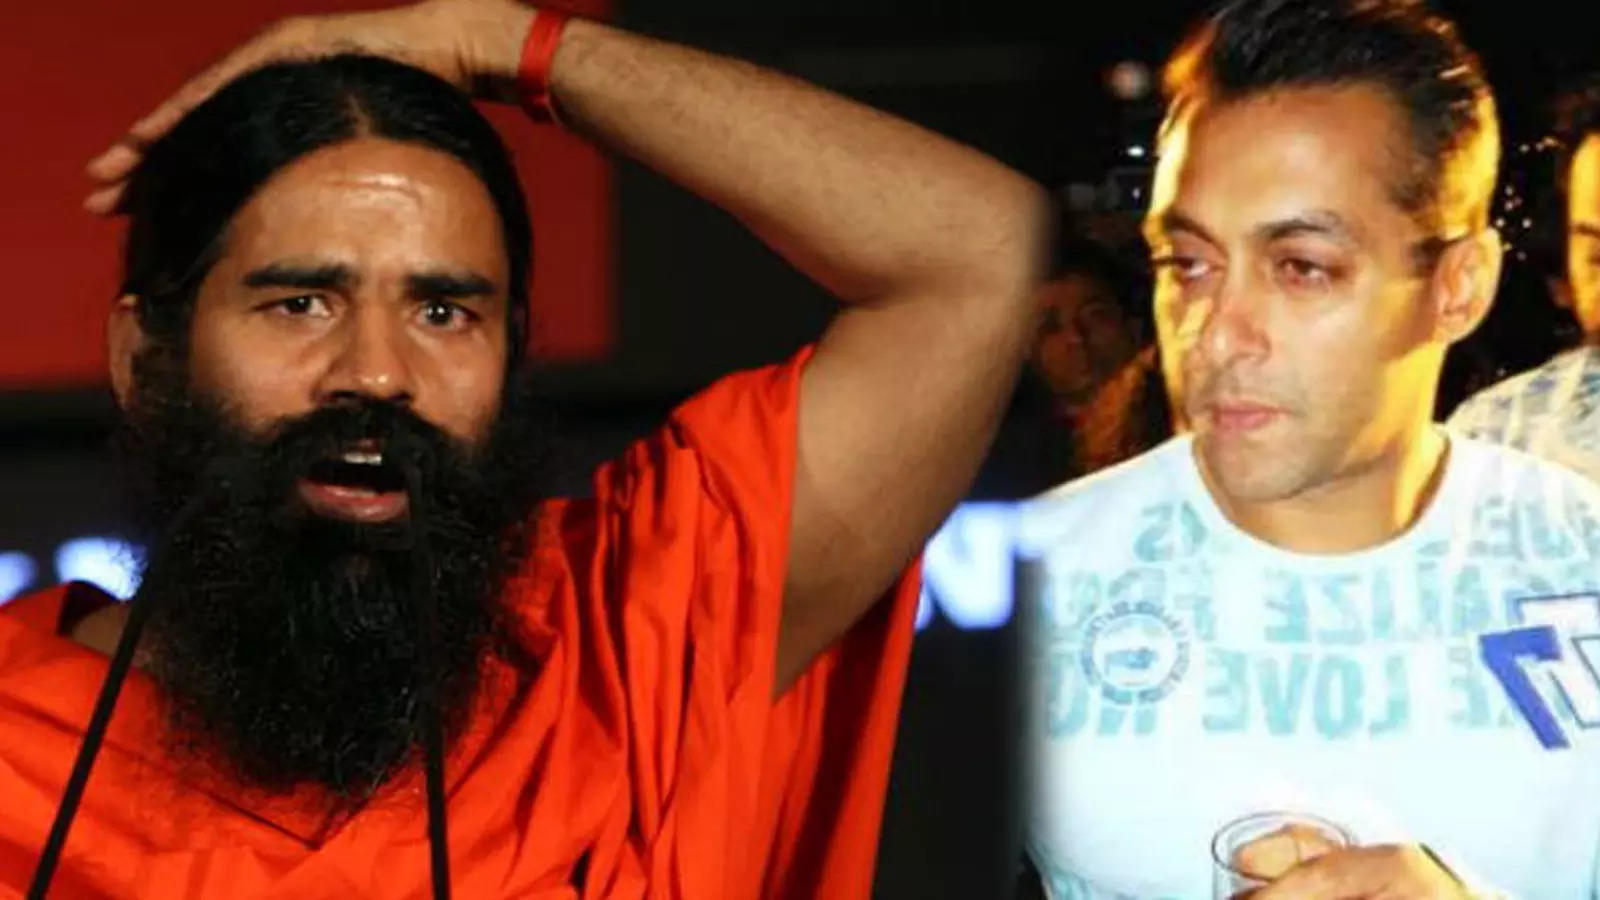 Salman Khan Consumes Drugs: Baba Ramdev's shocking claims: Salman Khan  consumes drugs, Shah Rukh Khan's son was also caught. God knows about the  actresses